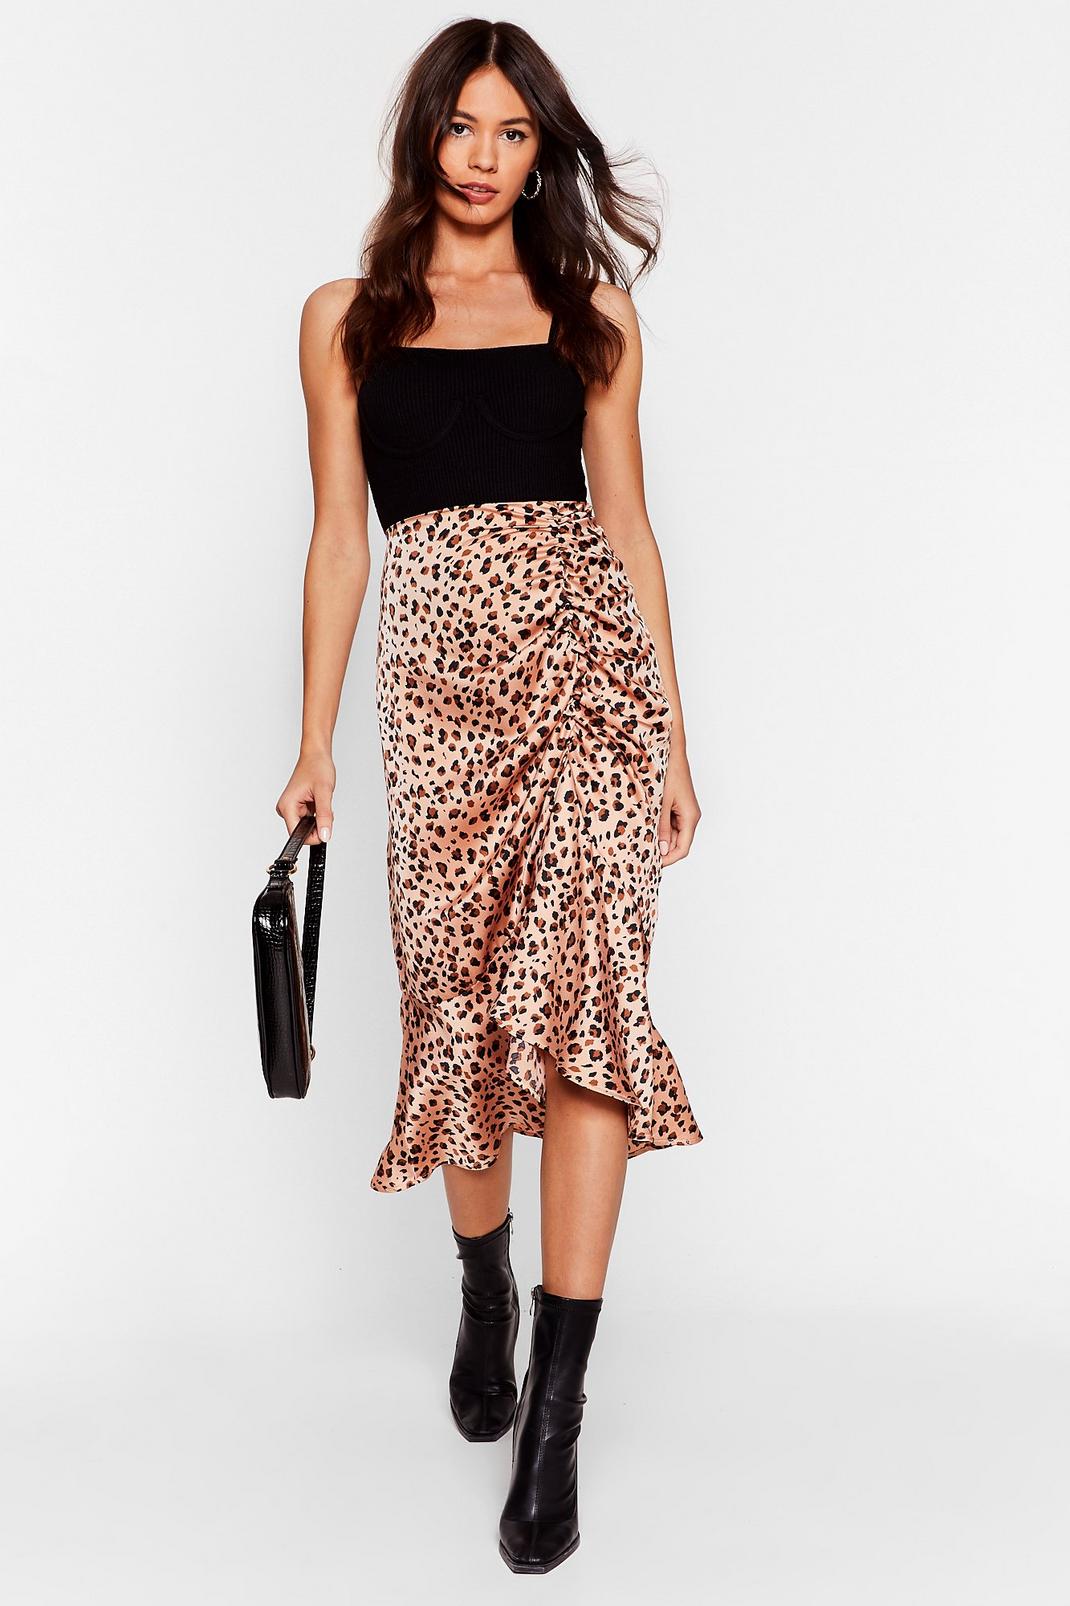 Meow Does She Do It Leopard Midi Skirt | Nasty Gal